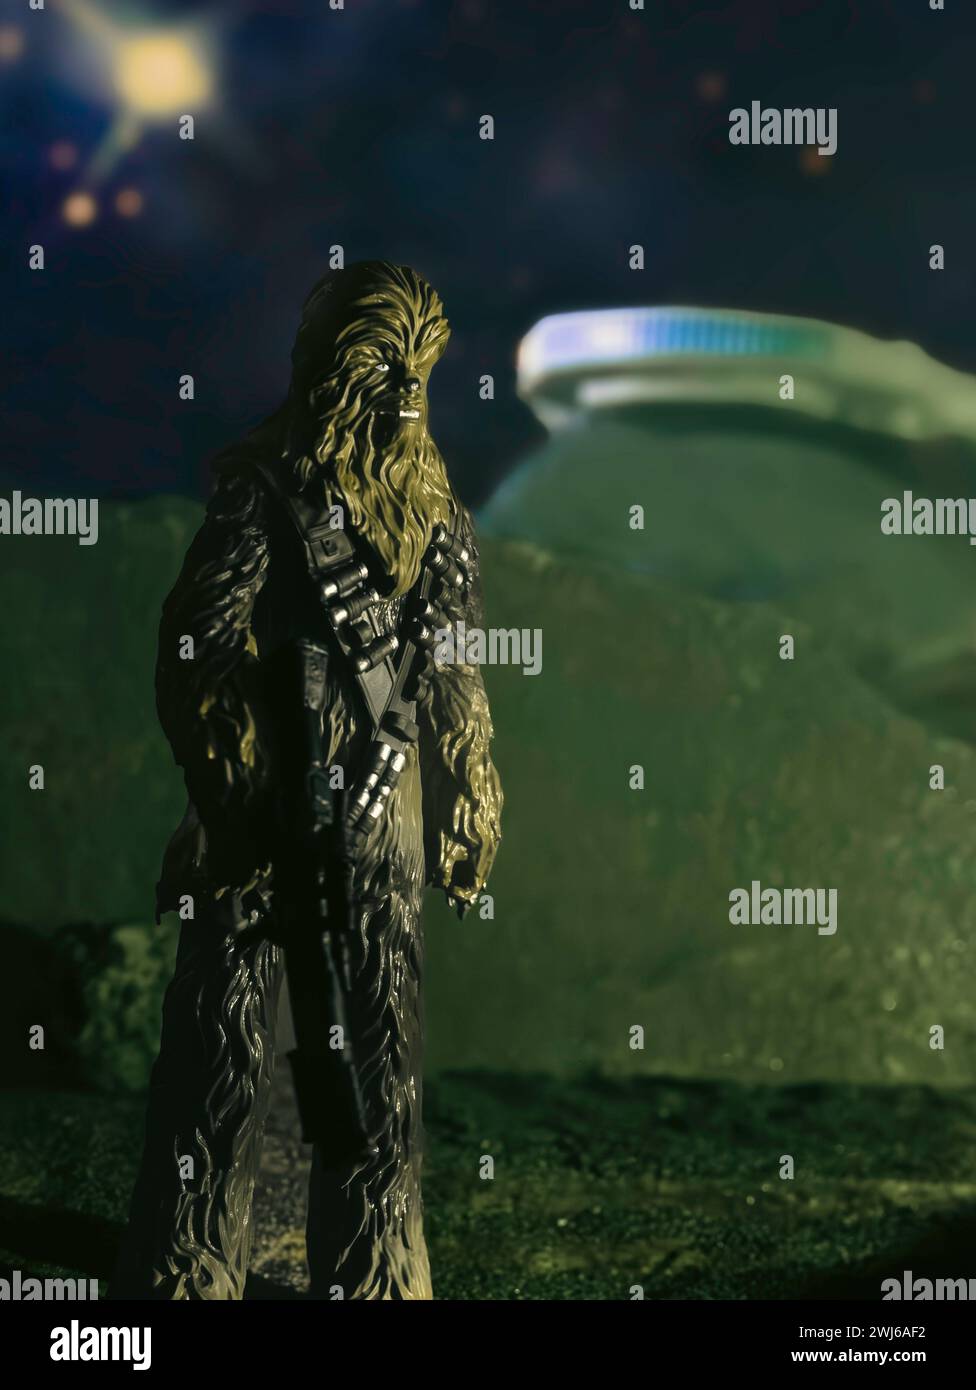 Chewbacca figure placed on a rocky planet with the Millennium Falcon in the background against a starry sky Stock Photo